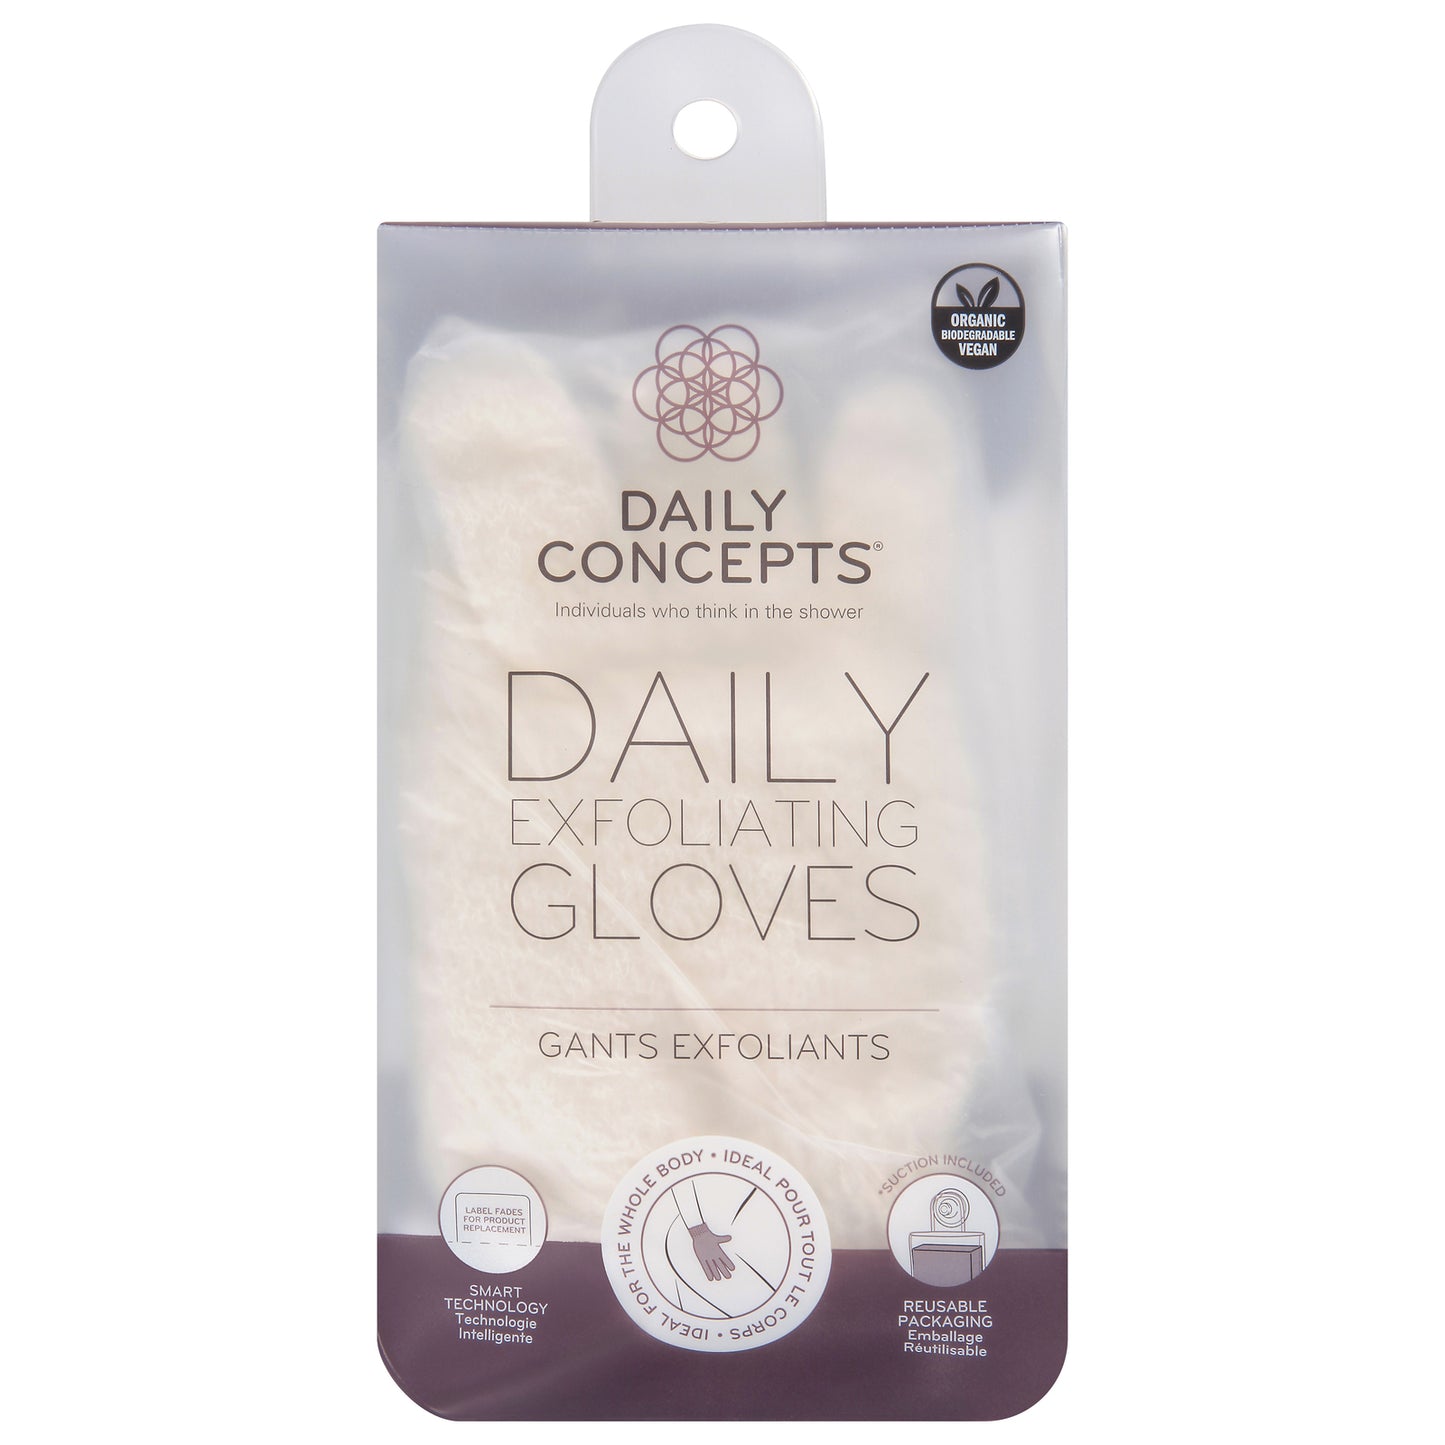 Daily Concepts - Gloves Exfoliating - 1 Each -1 Count